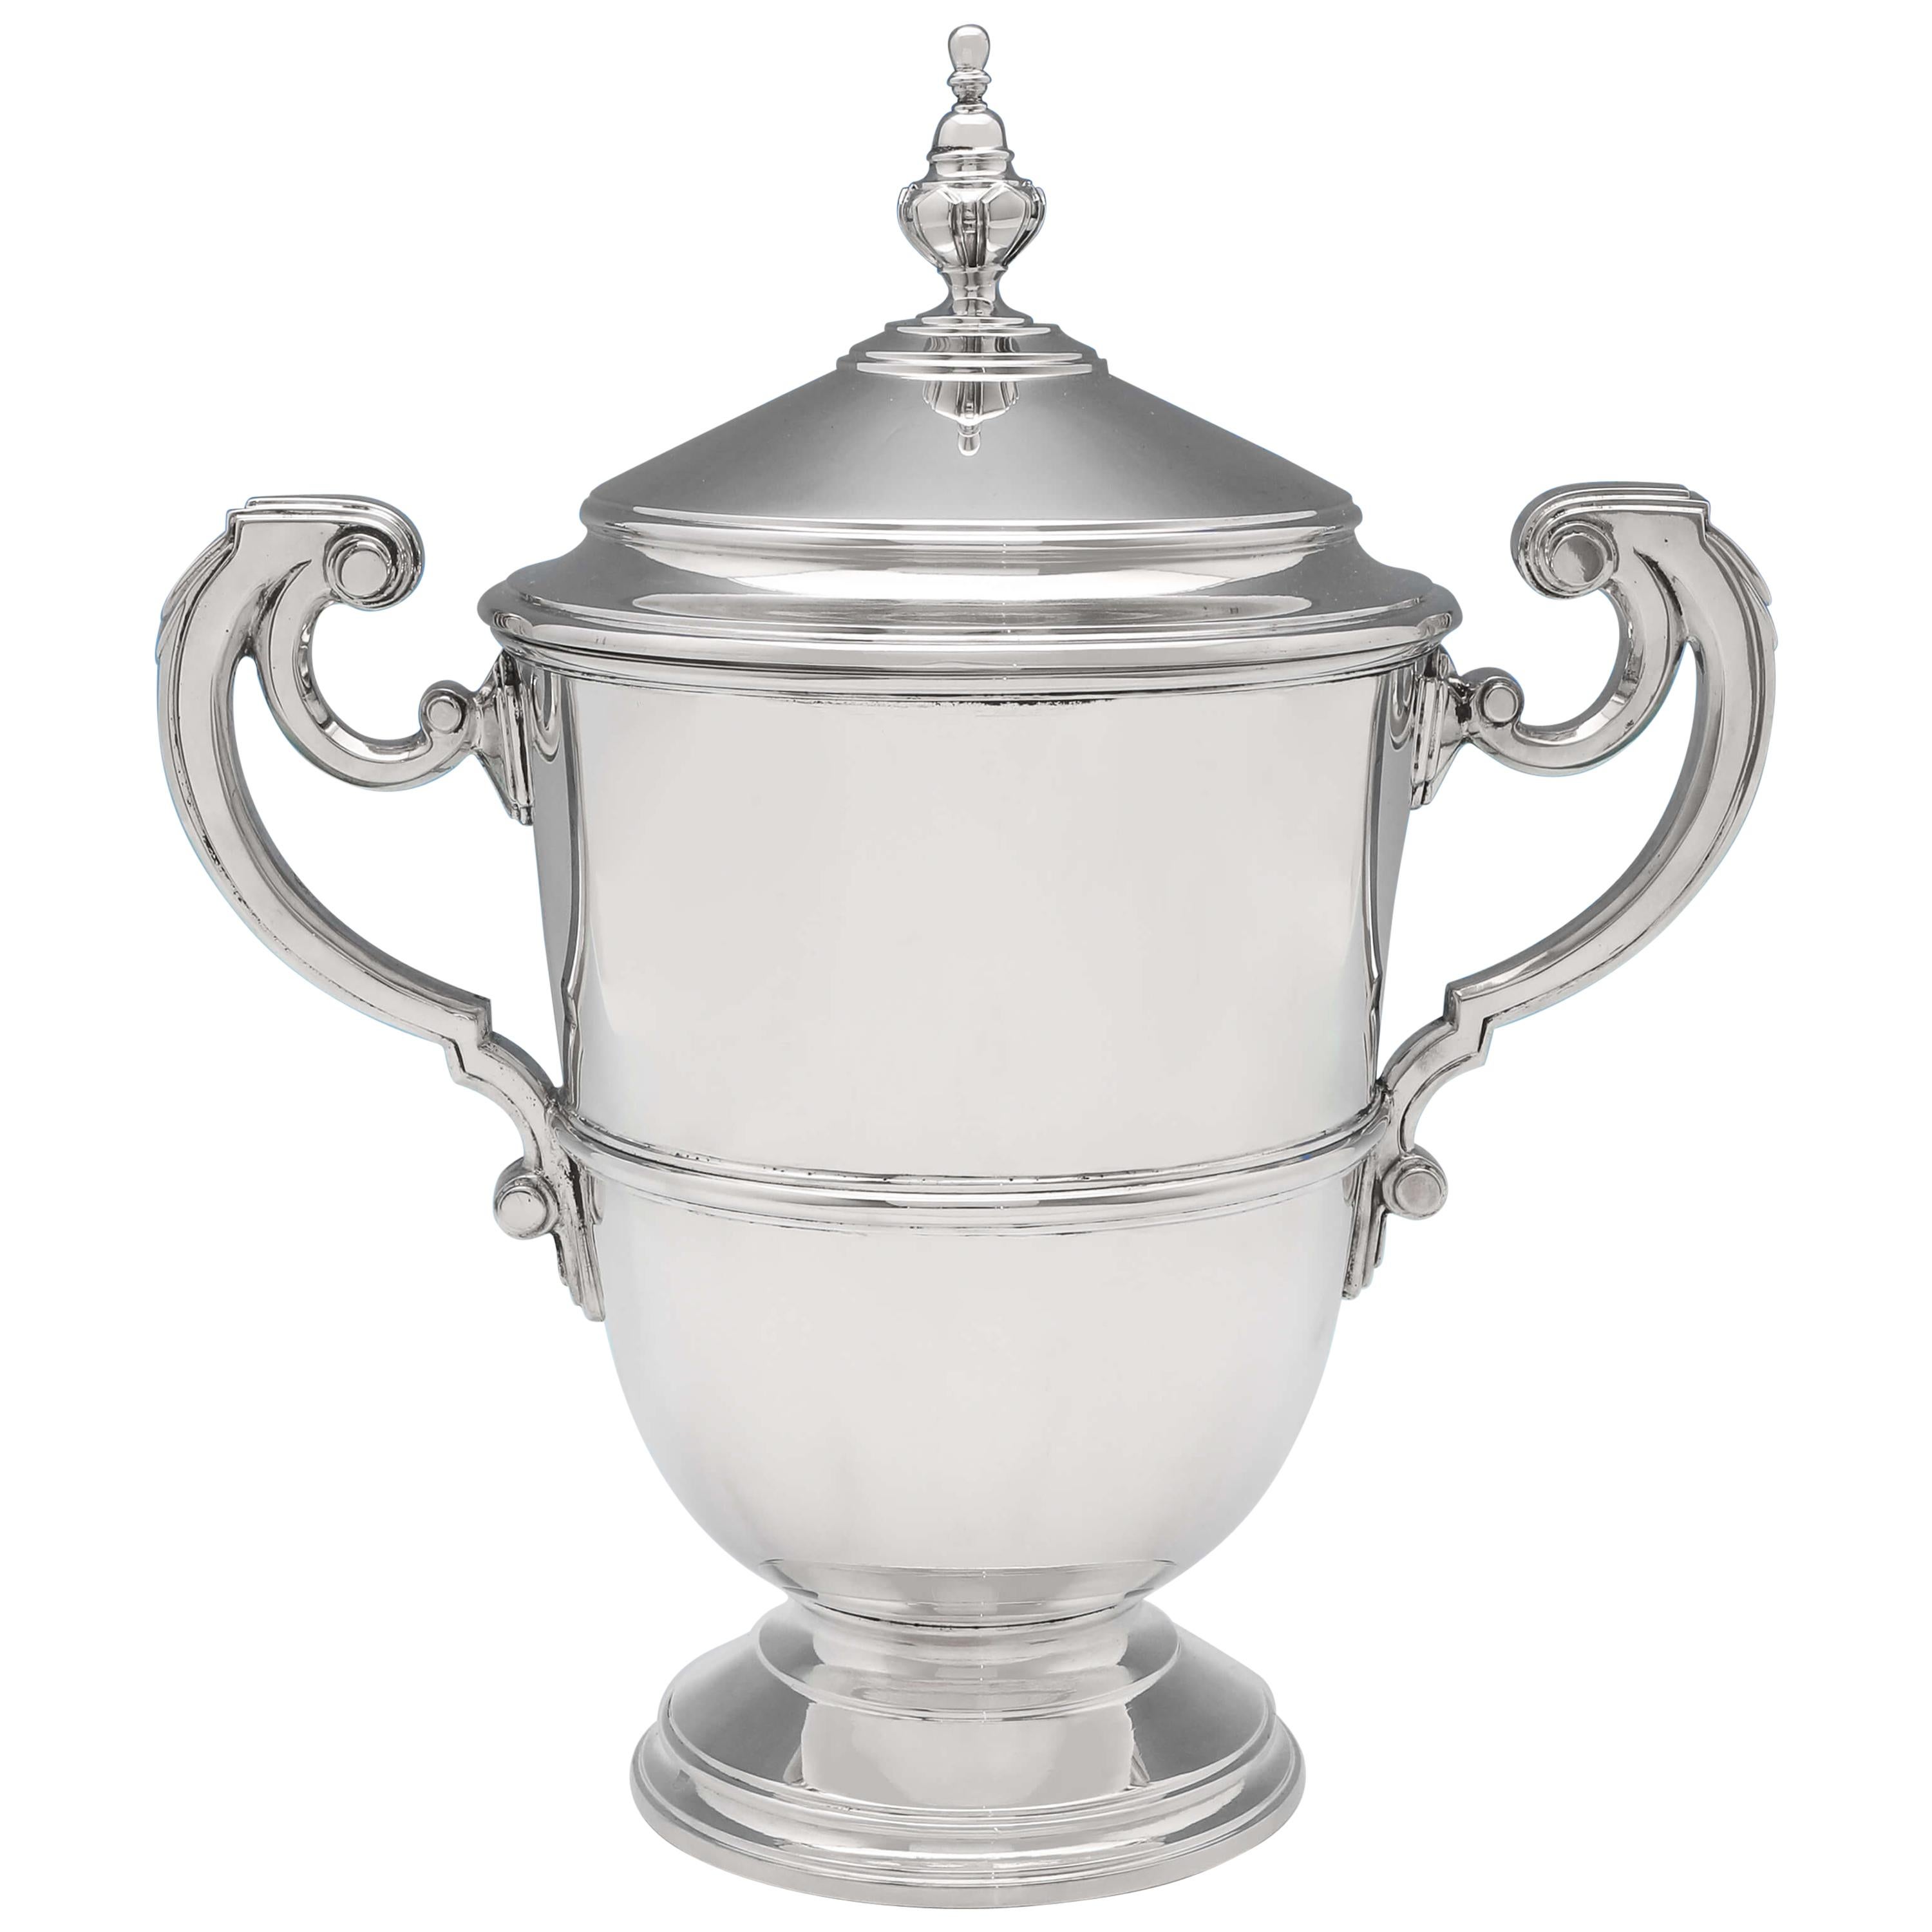 Art Deco Period Sterling Silver Trophy Cup and Cover by Richard Comyns in 1934